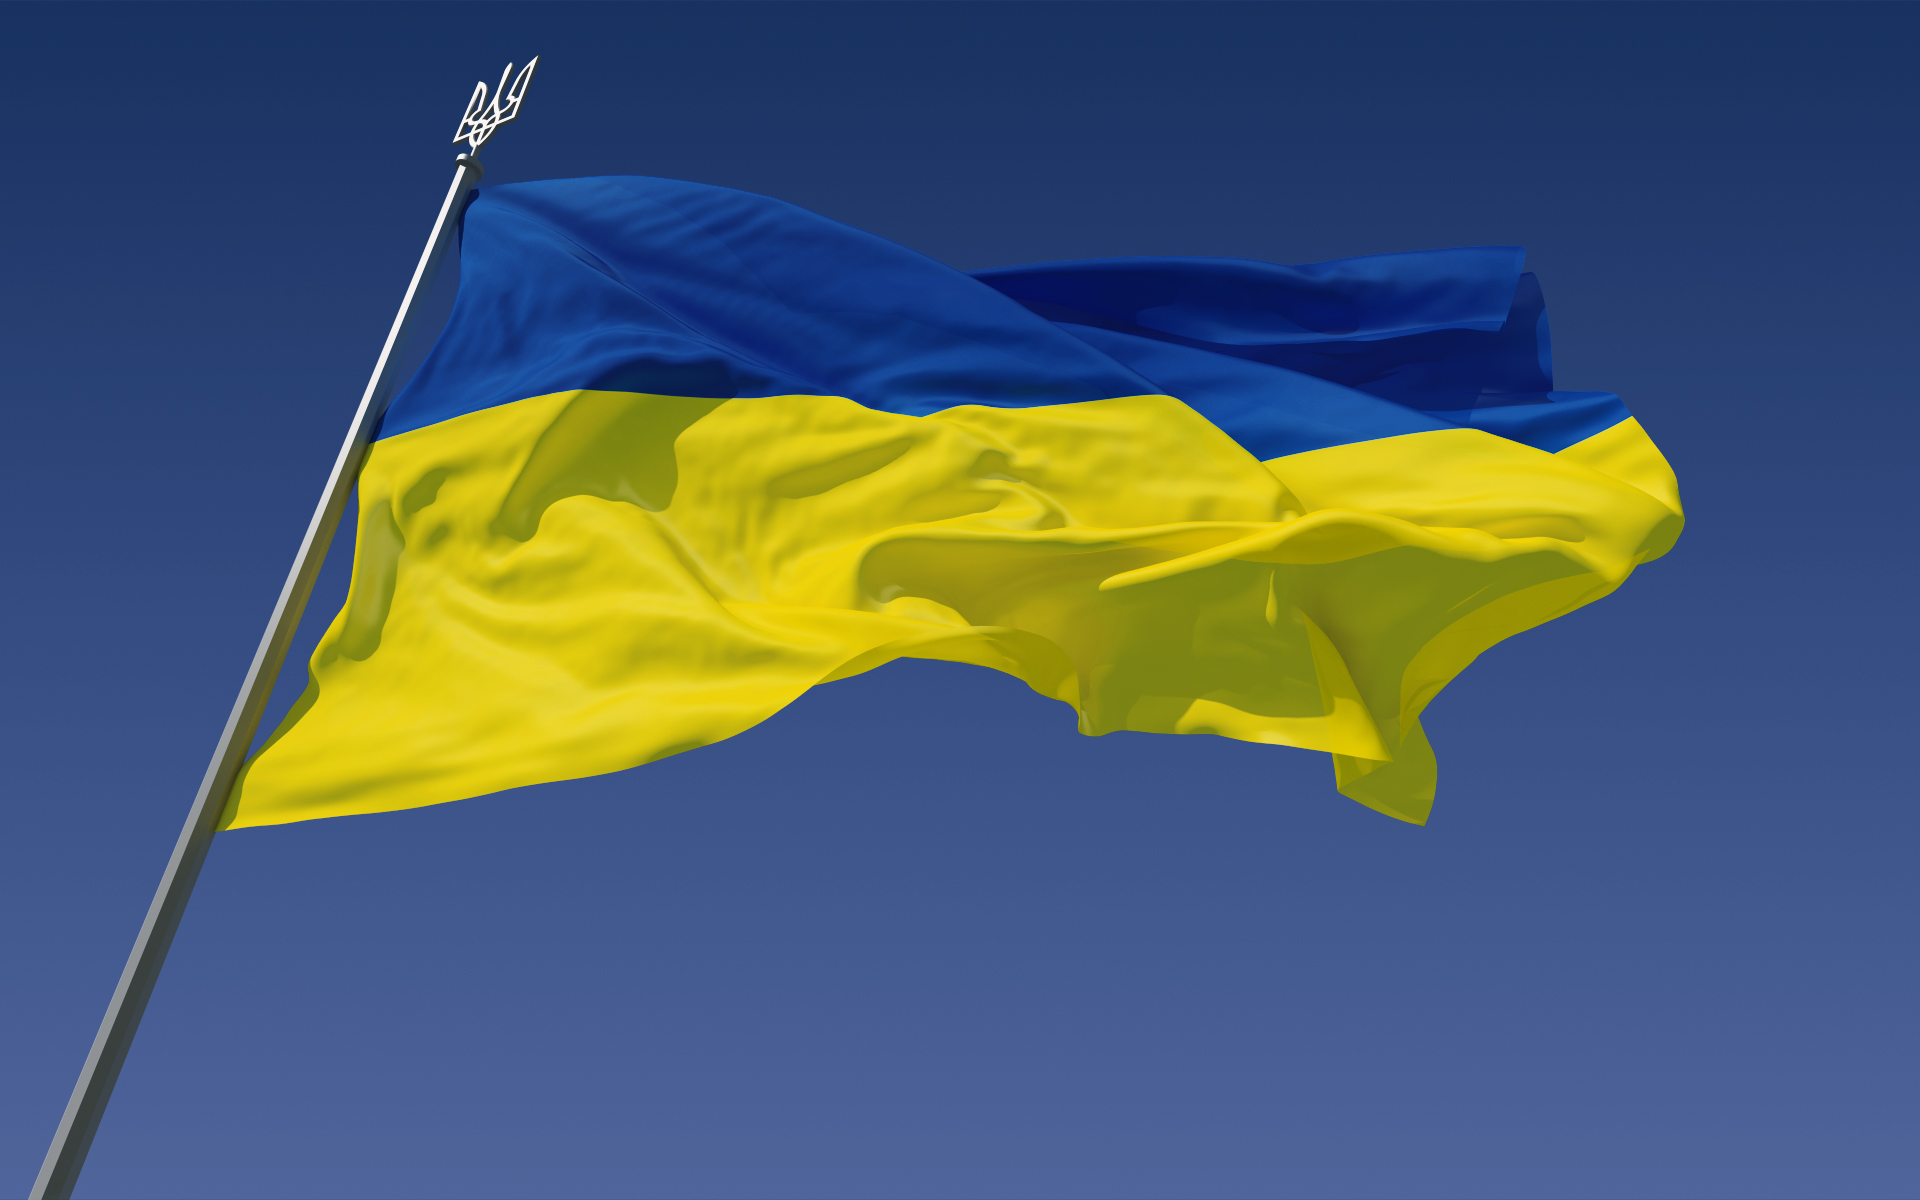 EOS, 3D Programs, HP, Zortrax and extra shut out Russian companies over Ukraine invasion